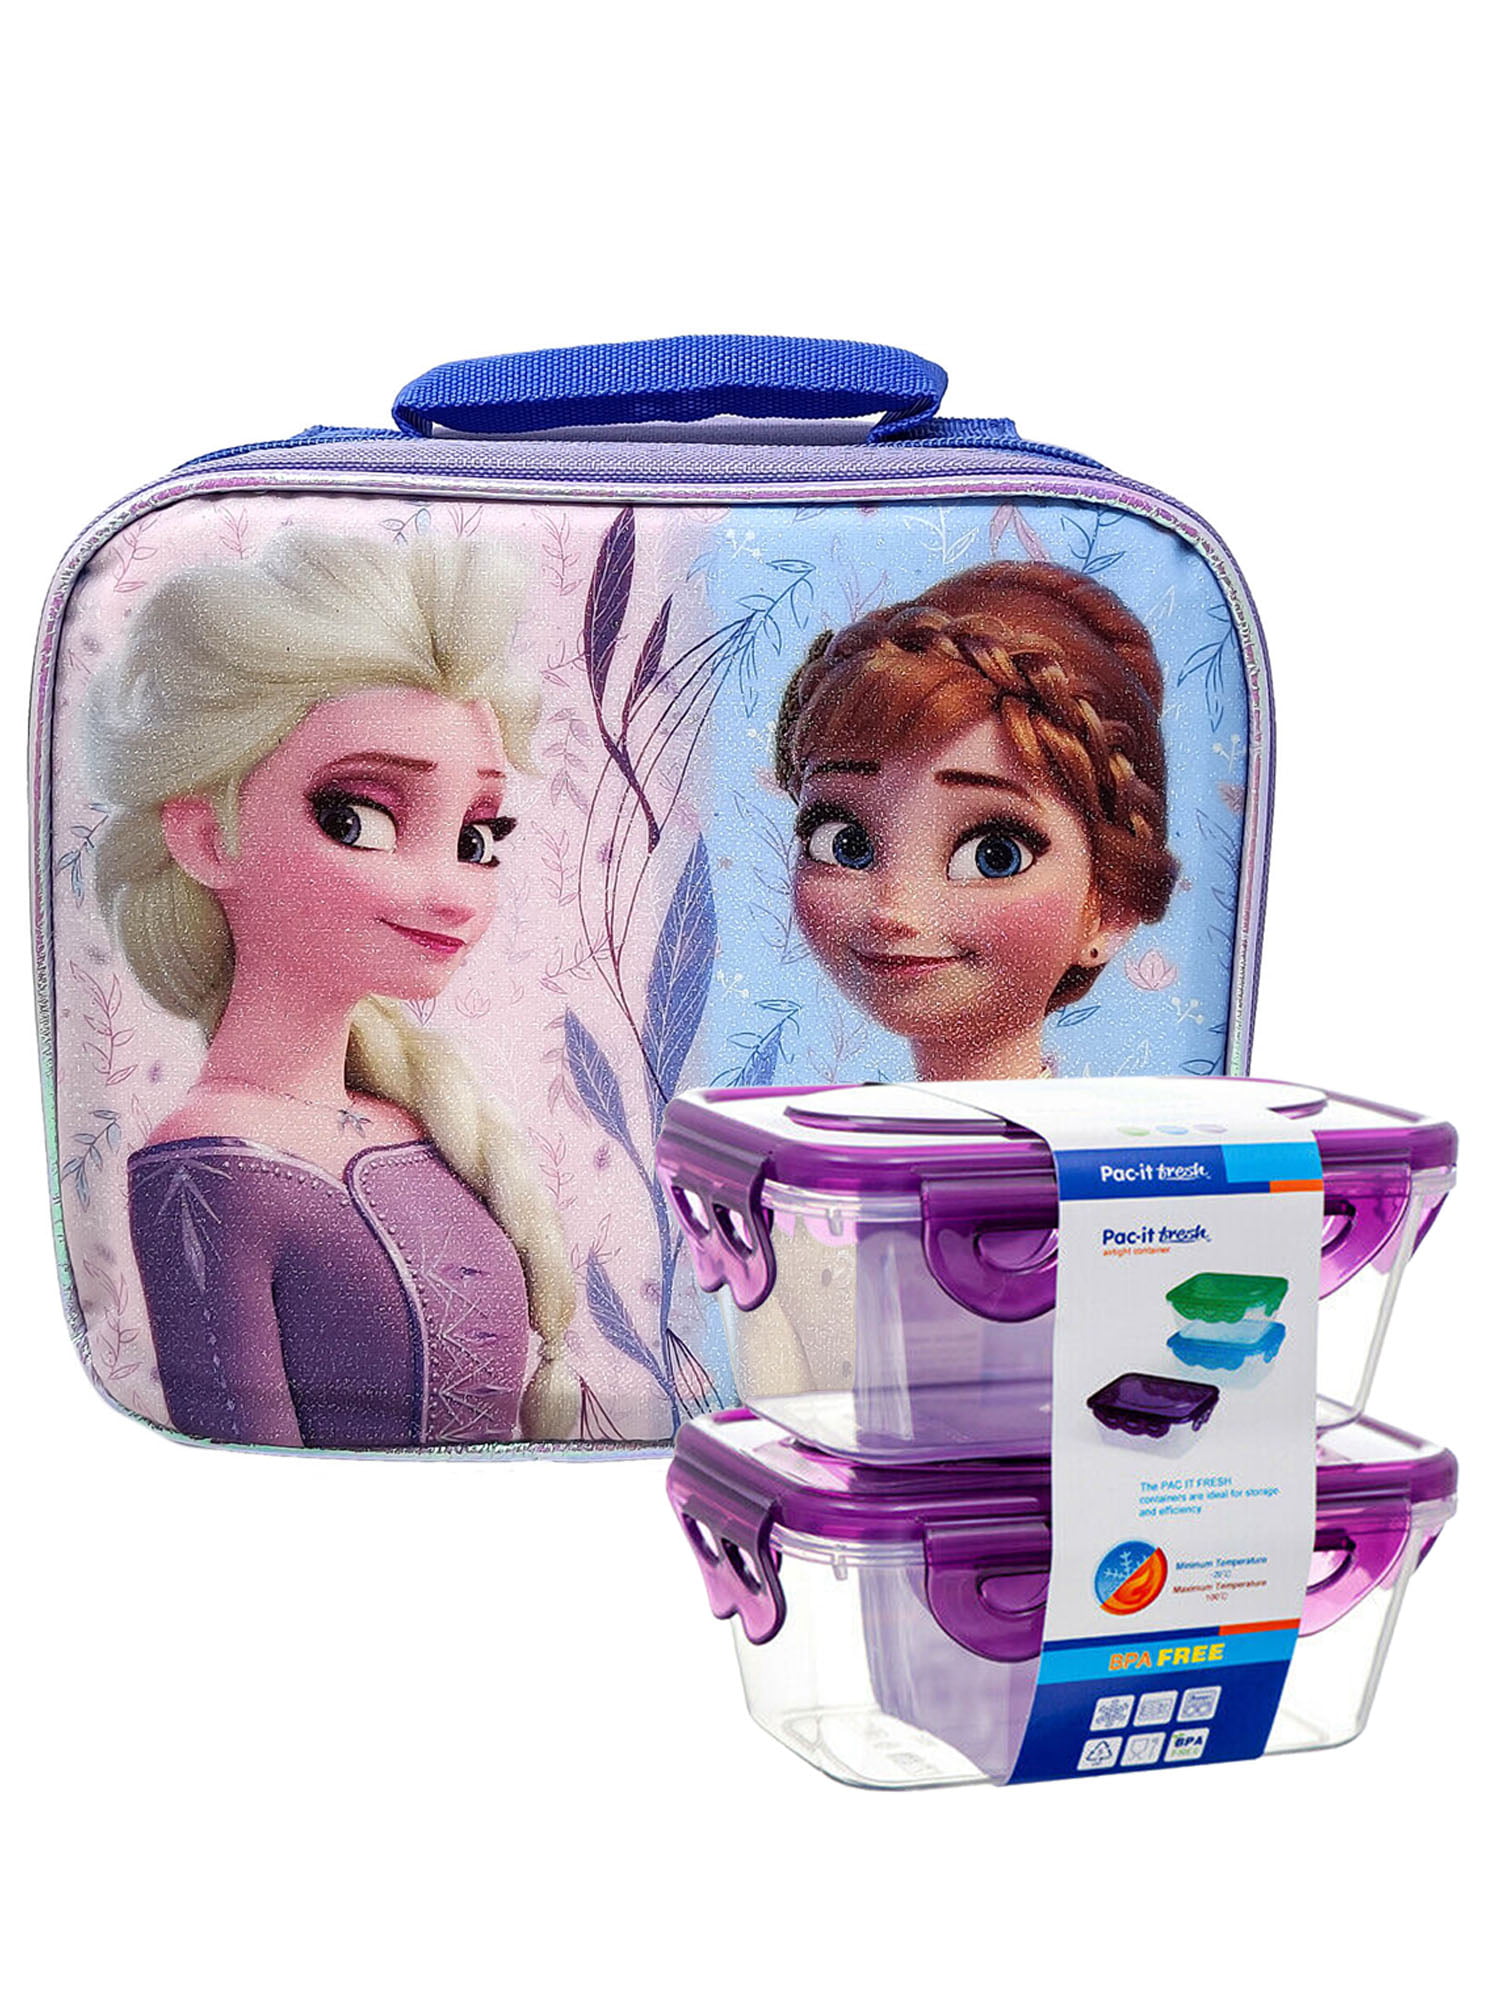 Kids Lunch Box Disney Frozen Elsa Plastic Sandwich Container with Spoon and Fork 